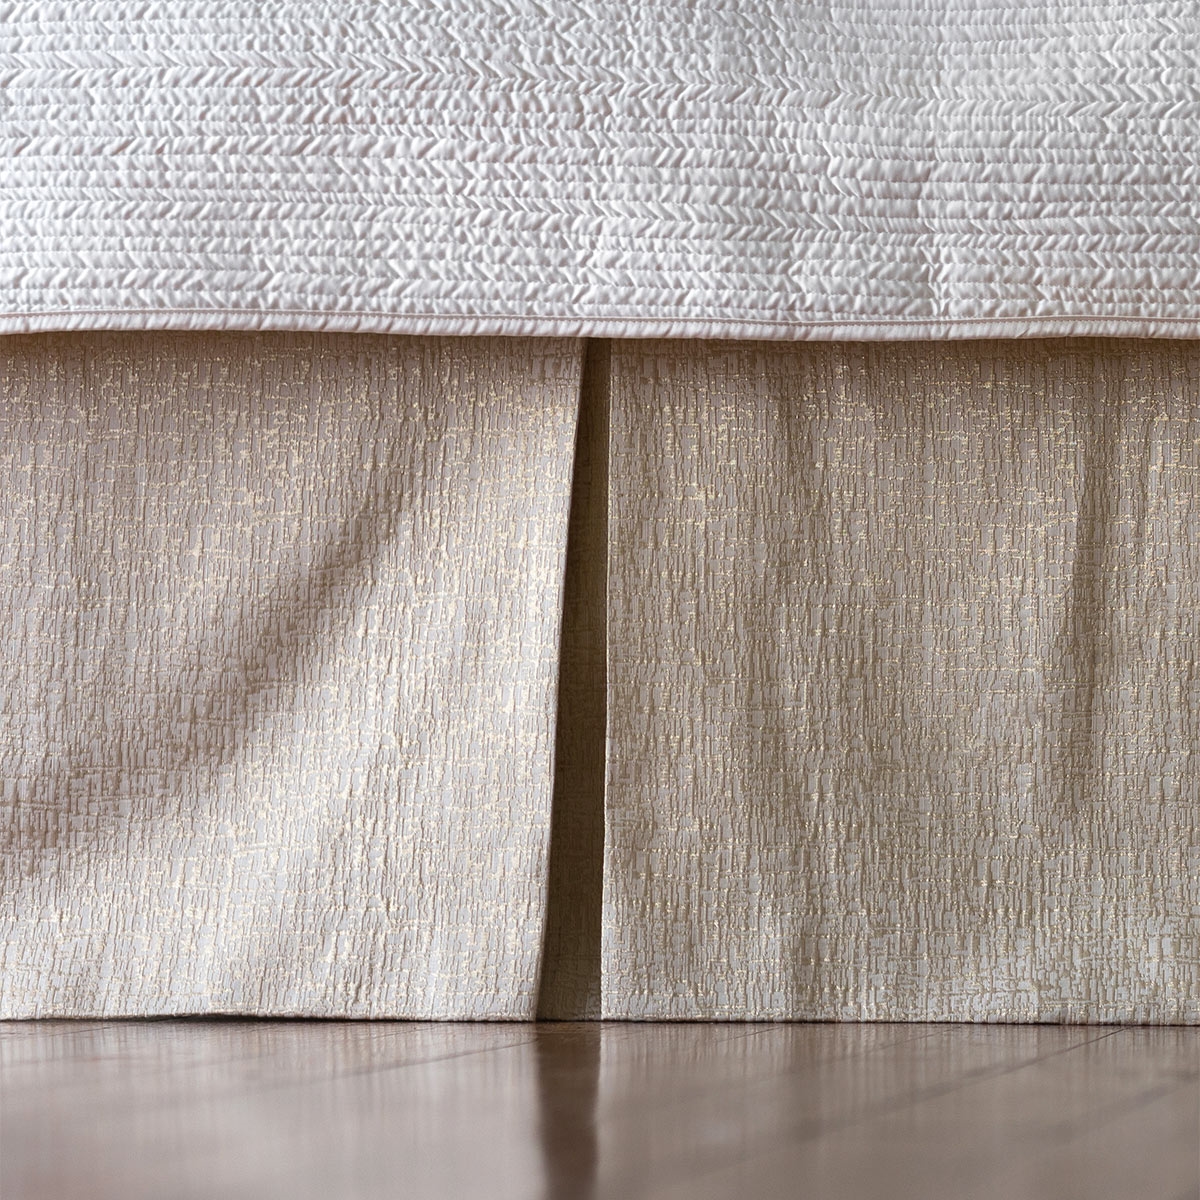 Shop Homethreads Bed Skirts and Dust Ruffles